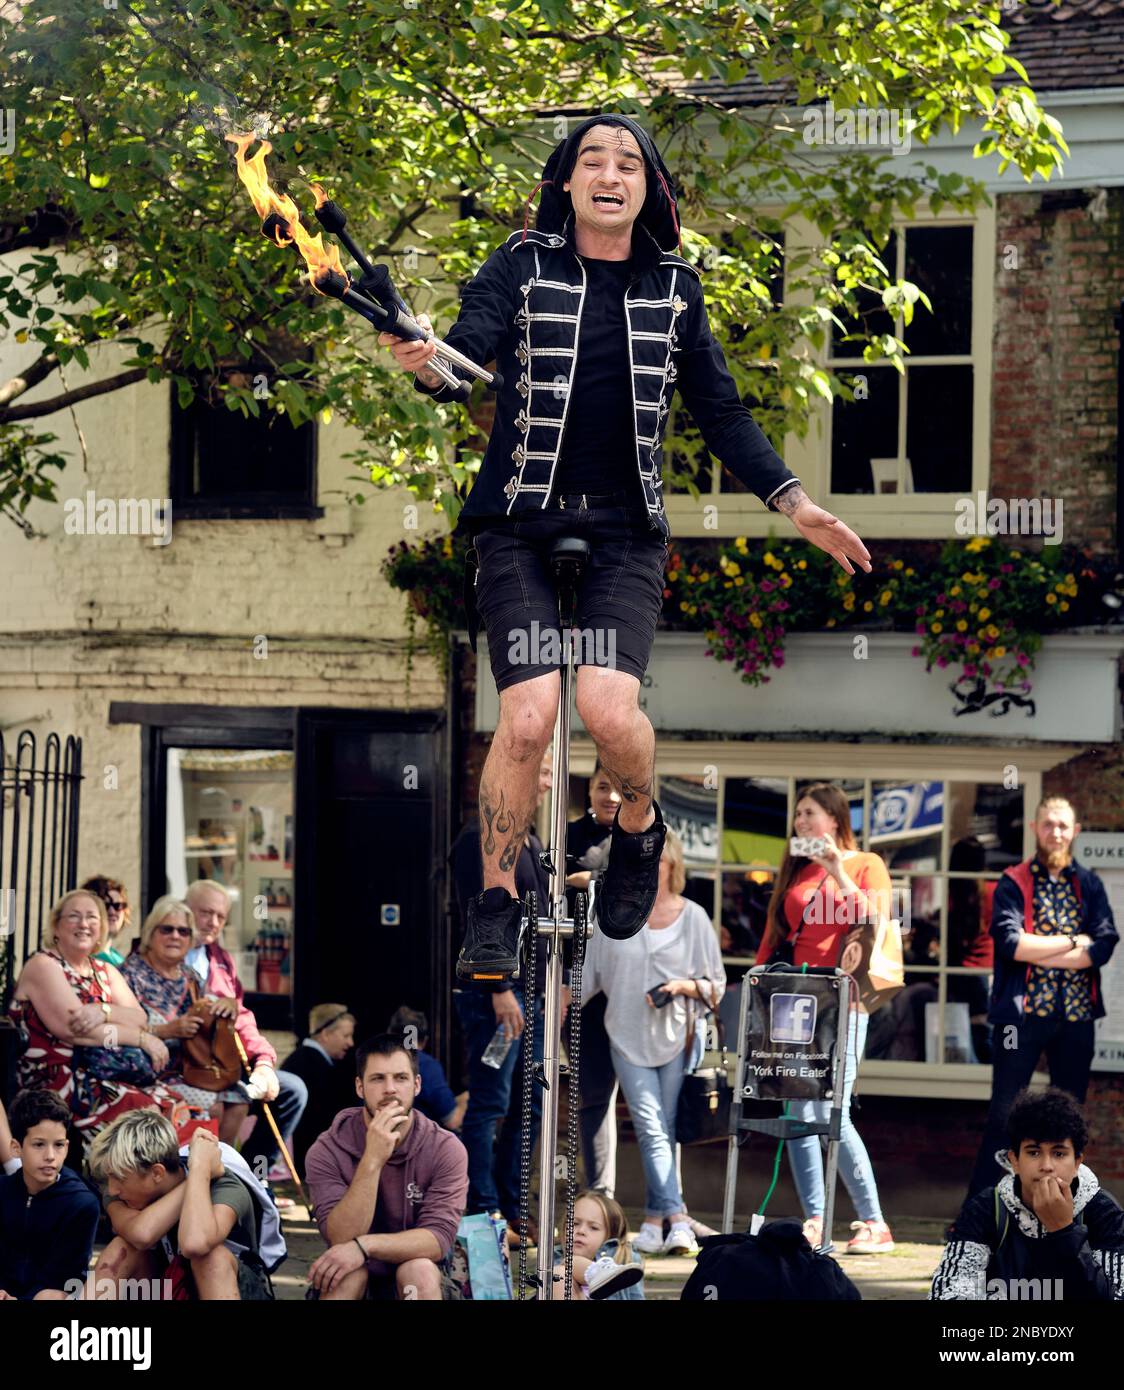 A street entertainer, juggling with clubs on fire, in the centre of York. Bystanders spectate in the background. Stock Photo